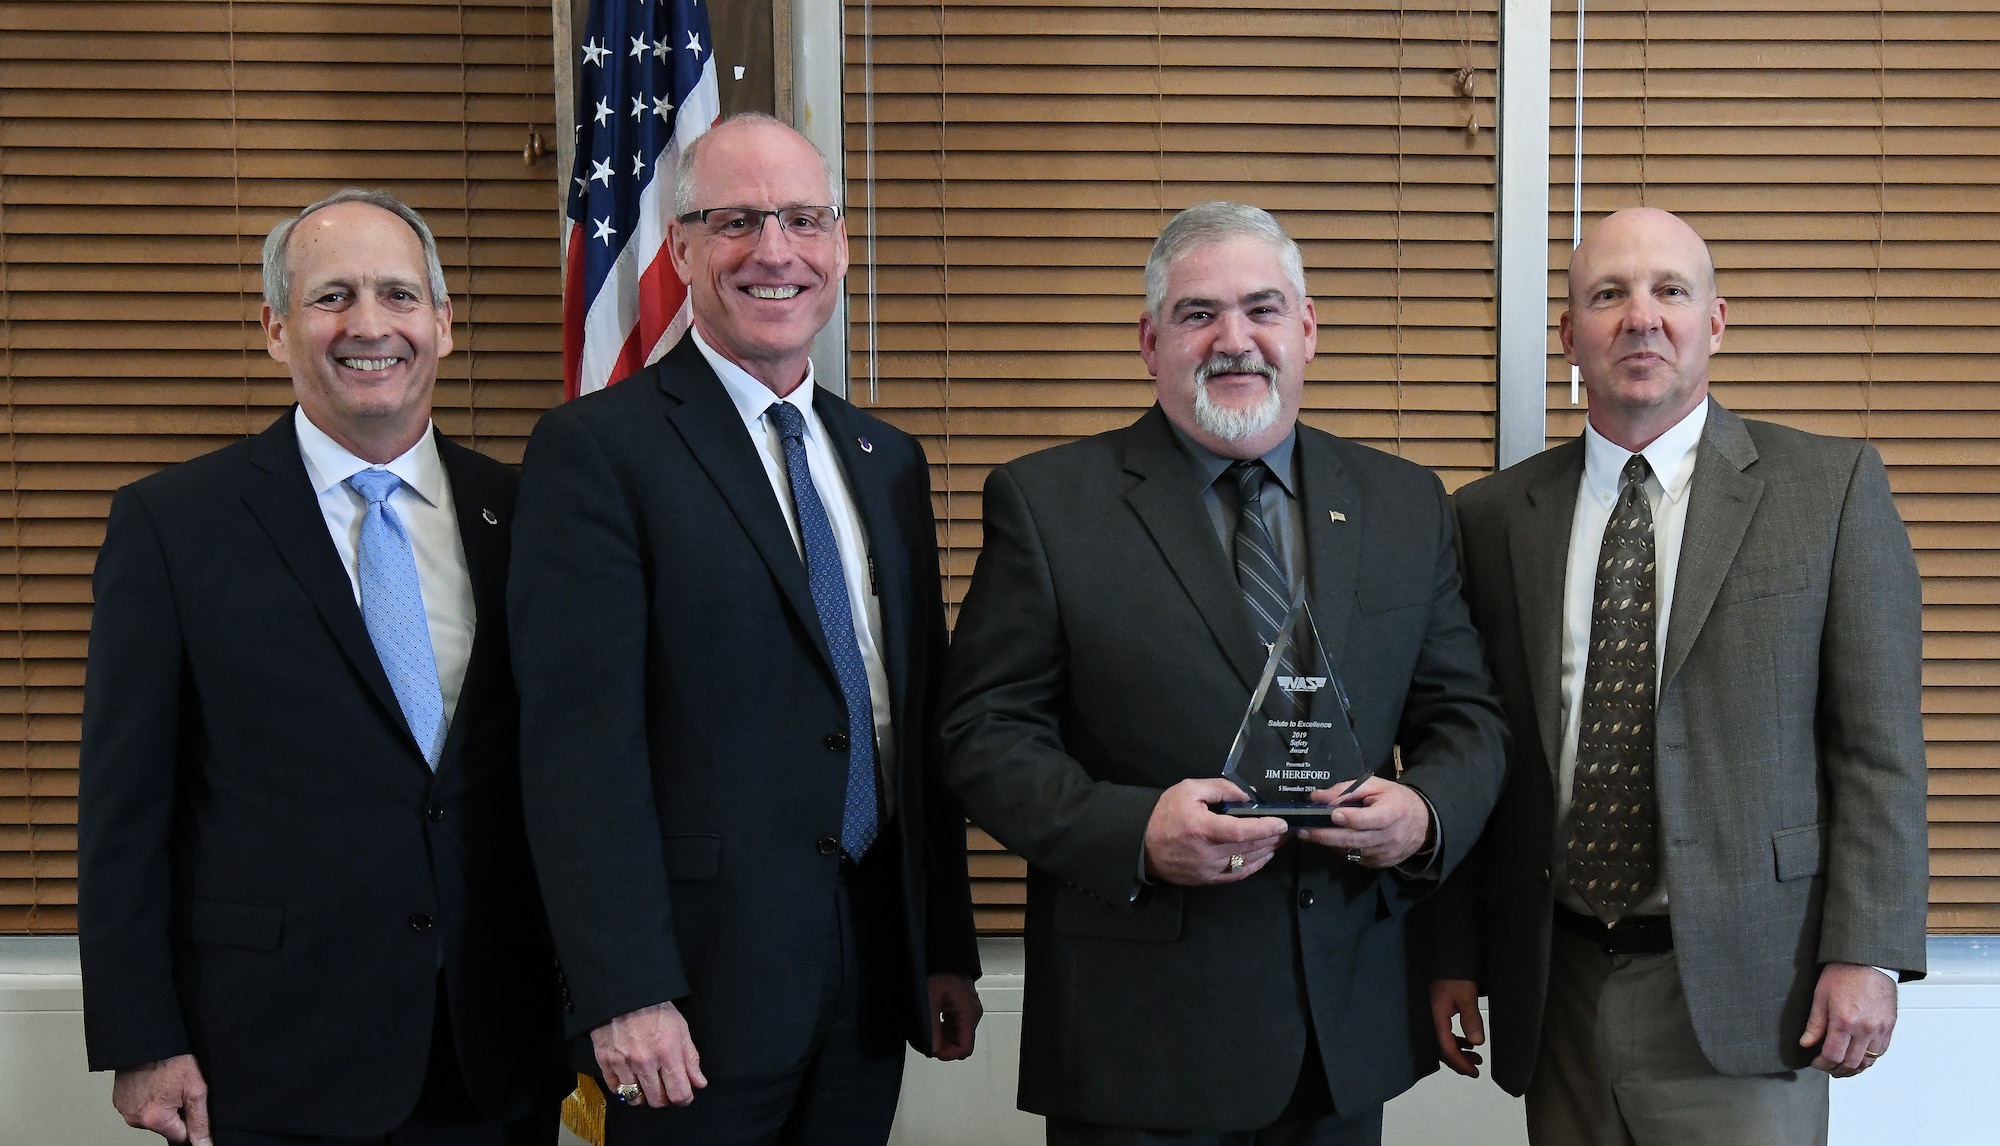 Machinist Chief Craftsperson Jim Hereford, thid from left, receives the Safety Award during the National Aerospace Solutions, LLC, Salute to Excellence Annual Awards Banquet, Nov. 5, 2019, at the Arnold Lakeside Center, Arnold Air Force Base, Tennessee. Also pictured, from left, is NAS Deputy General Manager Michael Belzil, NAS General Manager Dr. Richard Tighe and NAS Performance Assurance Director Mark Bymaster. (U.S. Air Force photo by Jill Pickett)